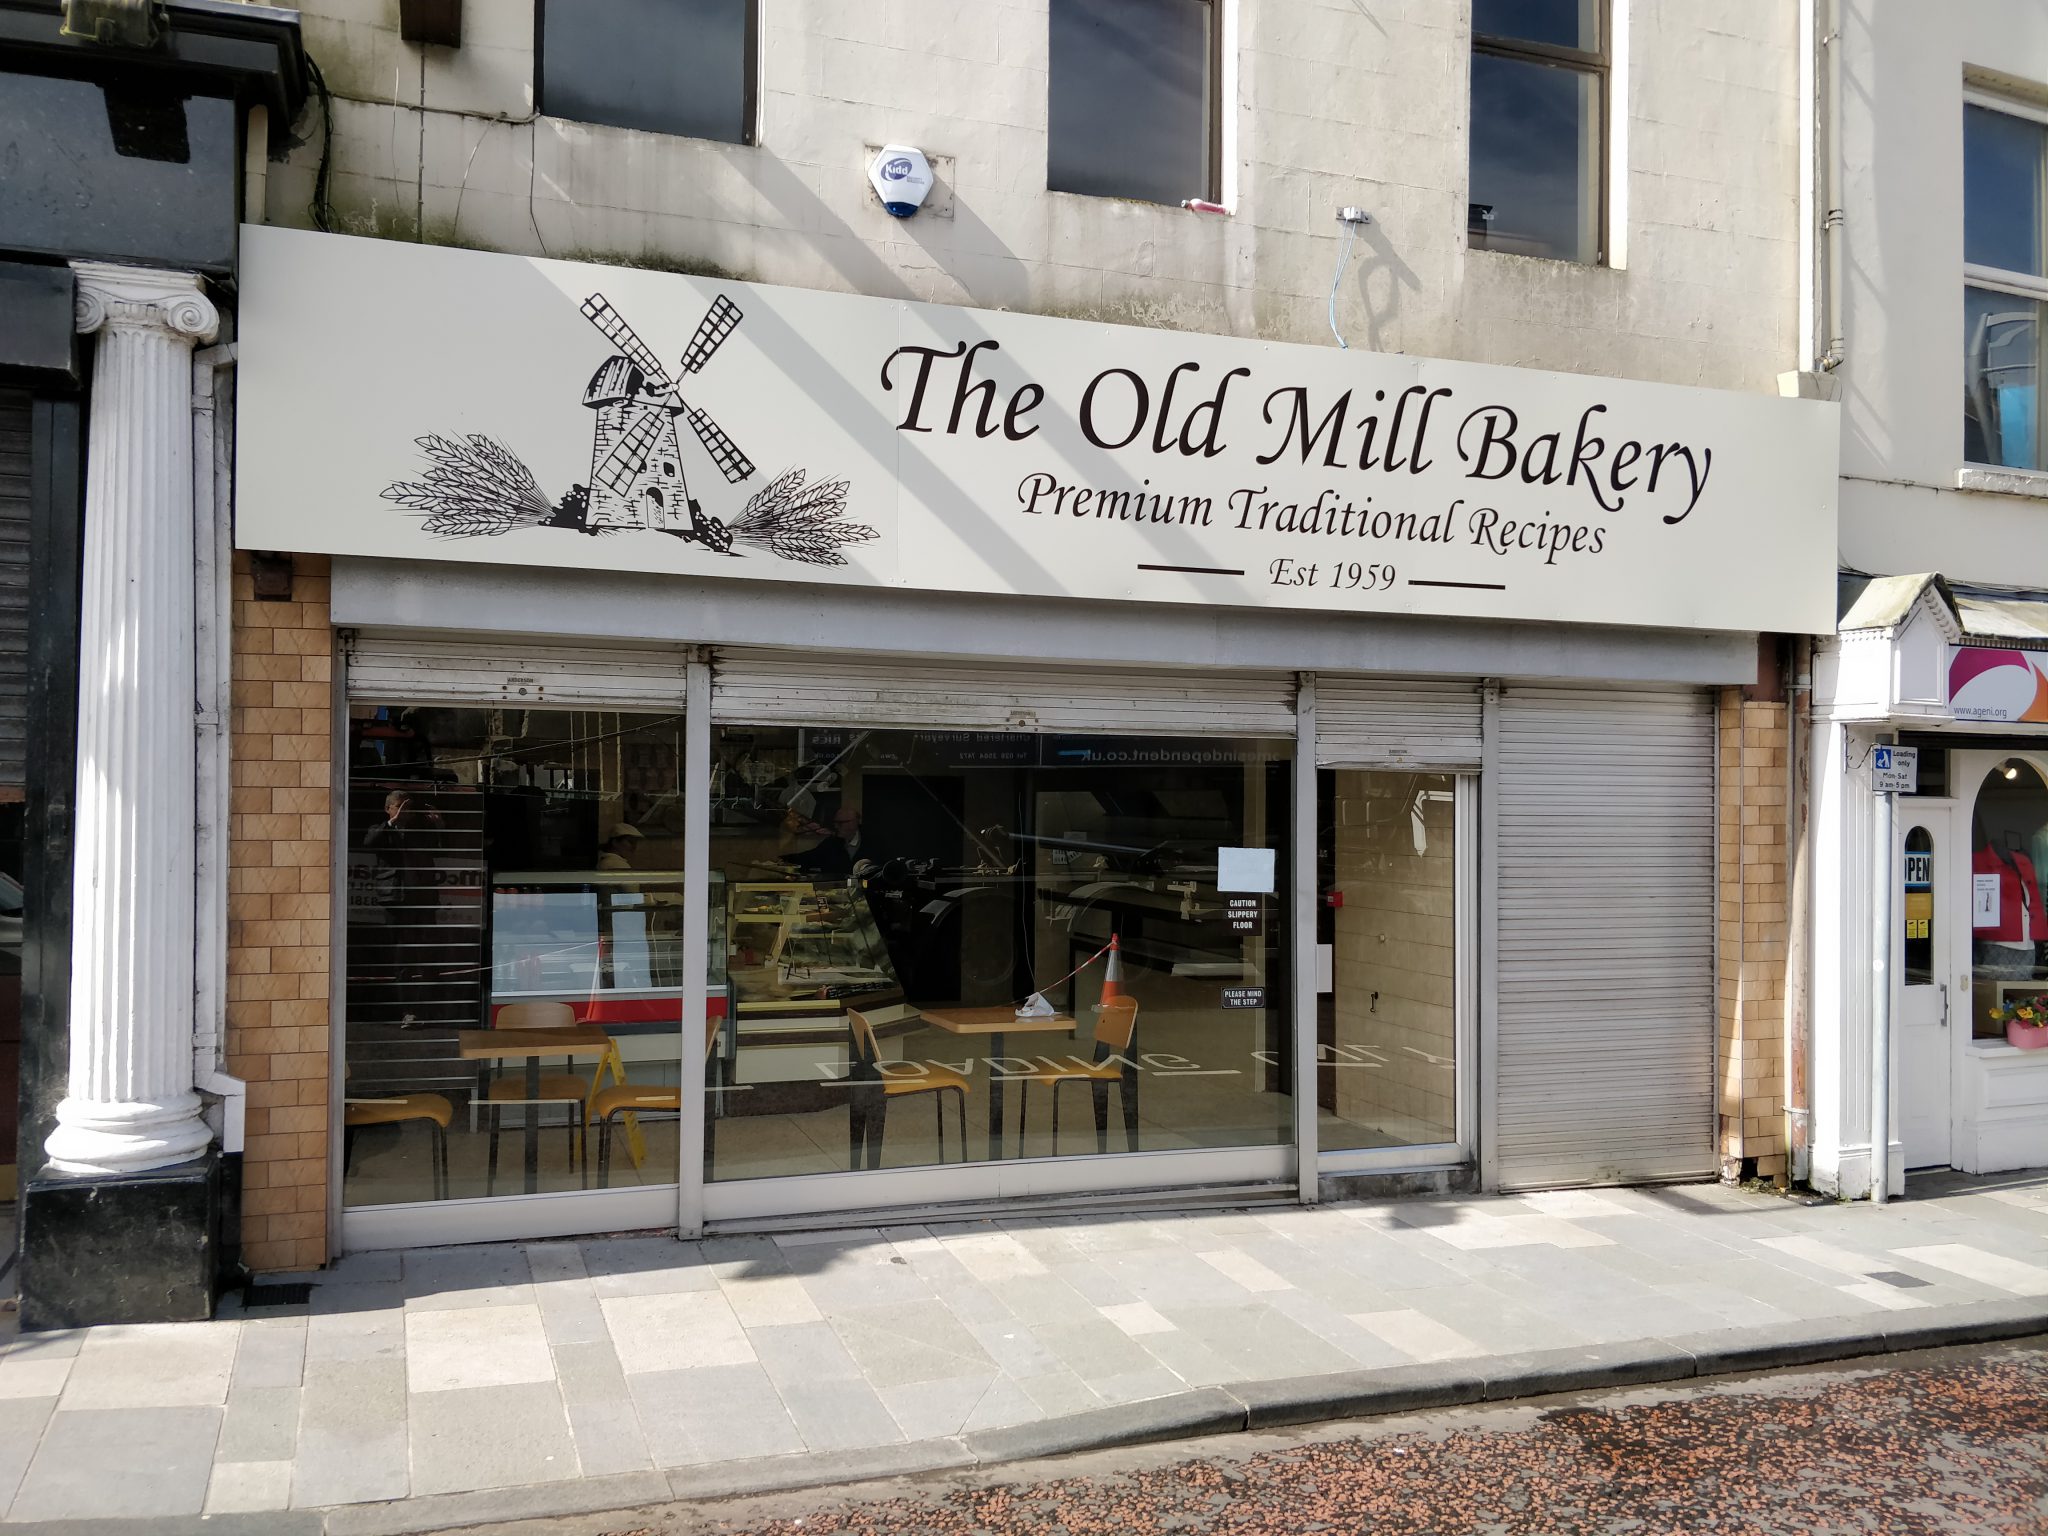 The Old Mill Bakery – a bakery with so much history